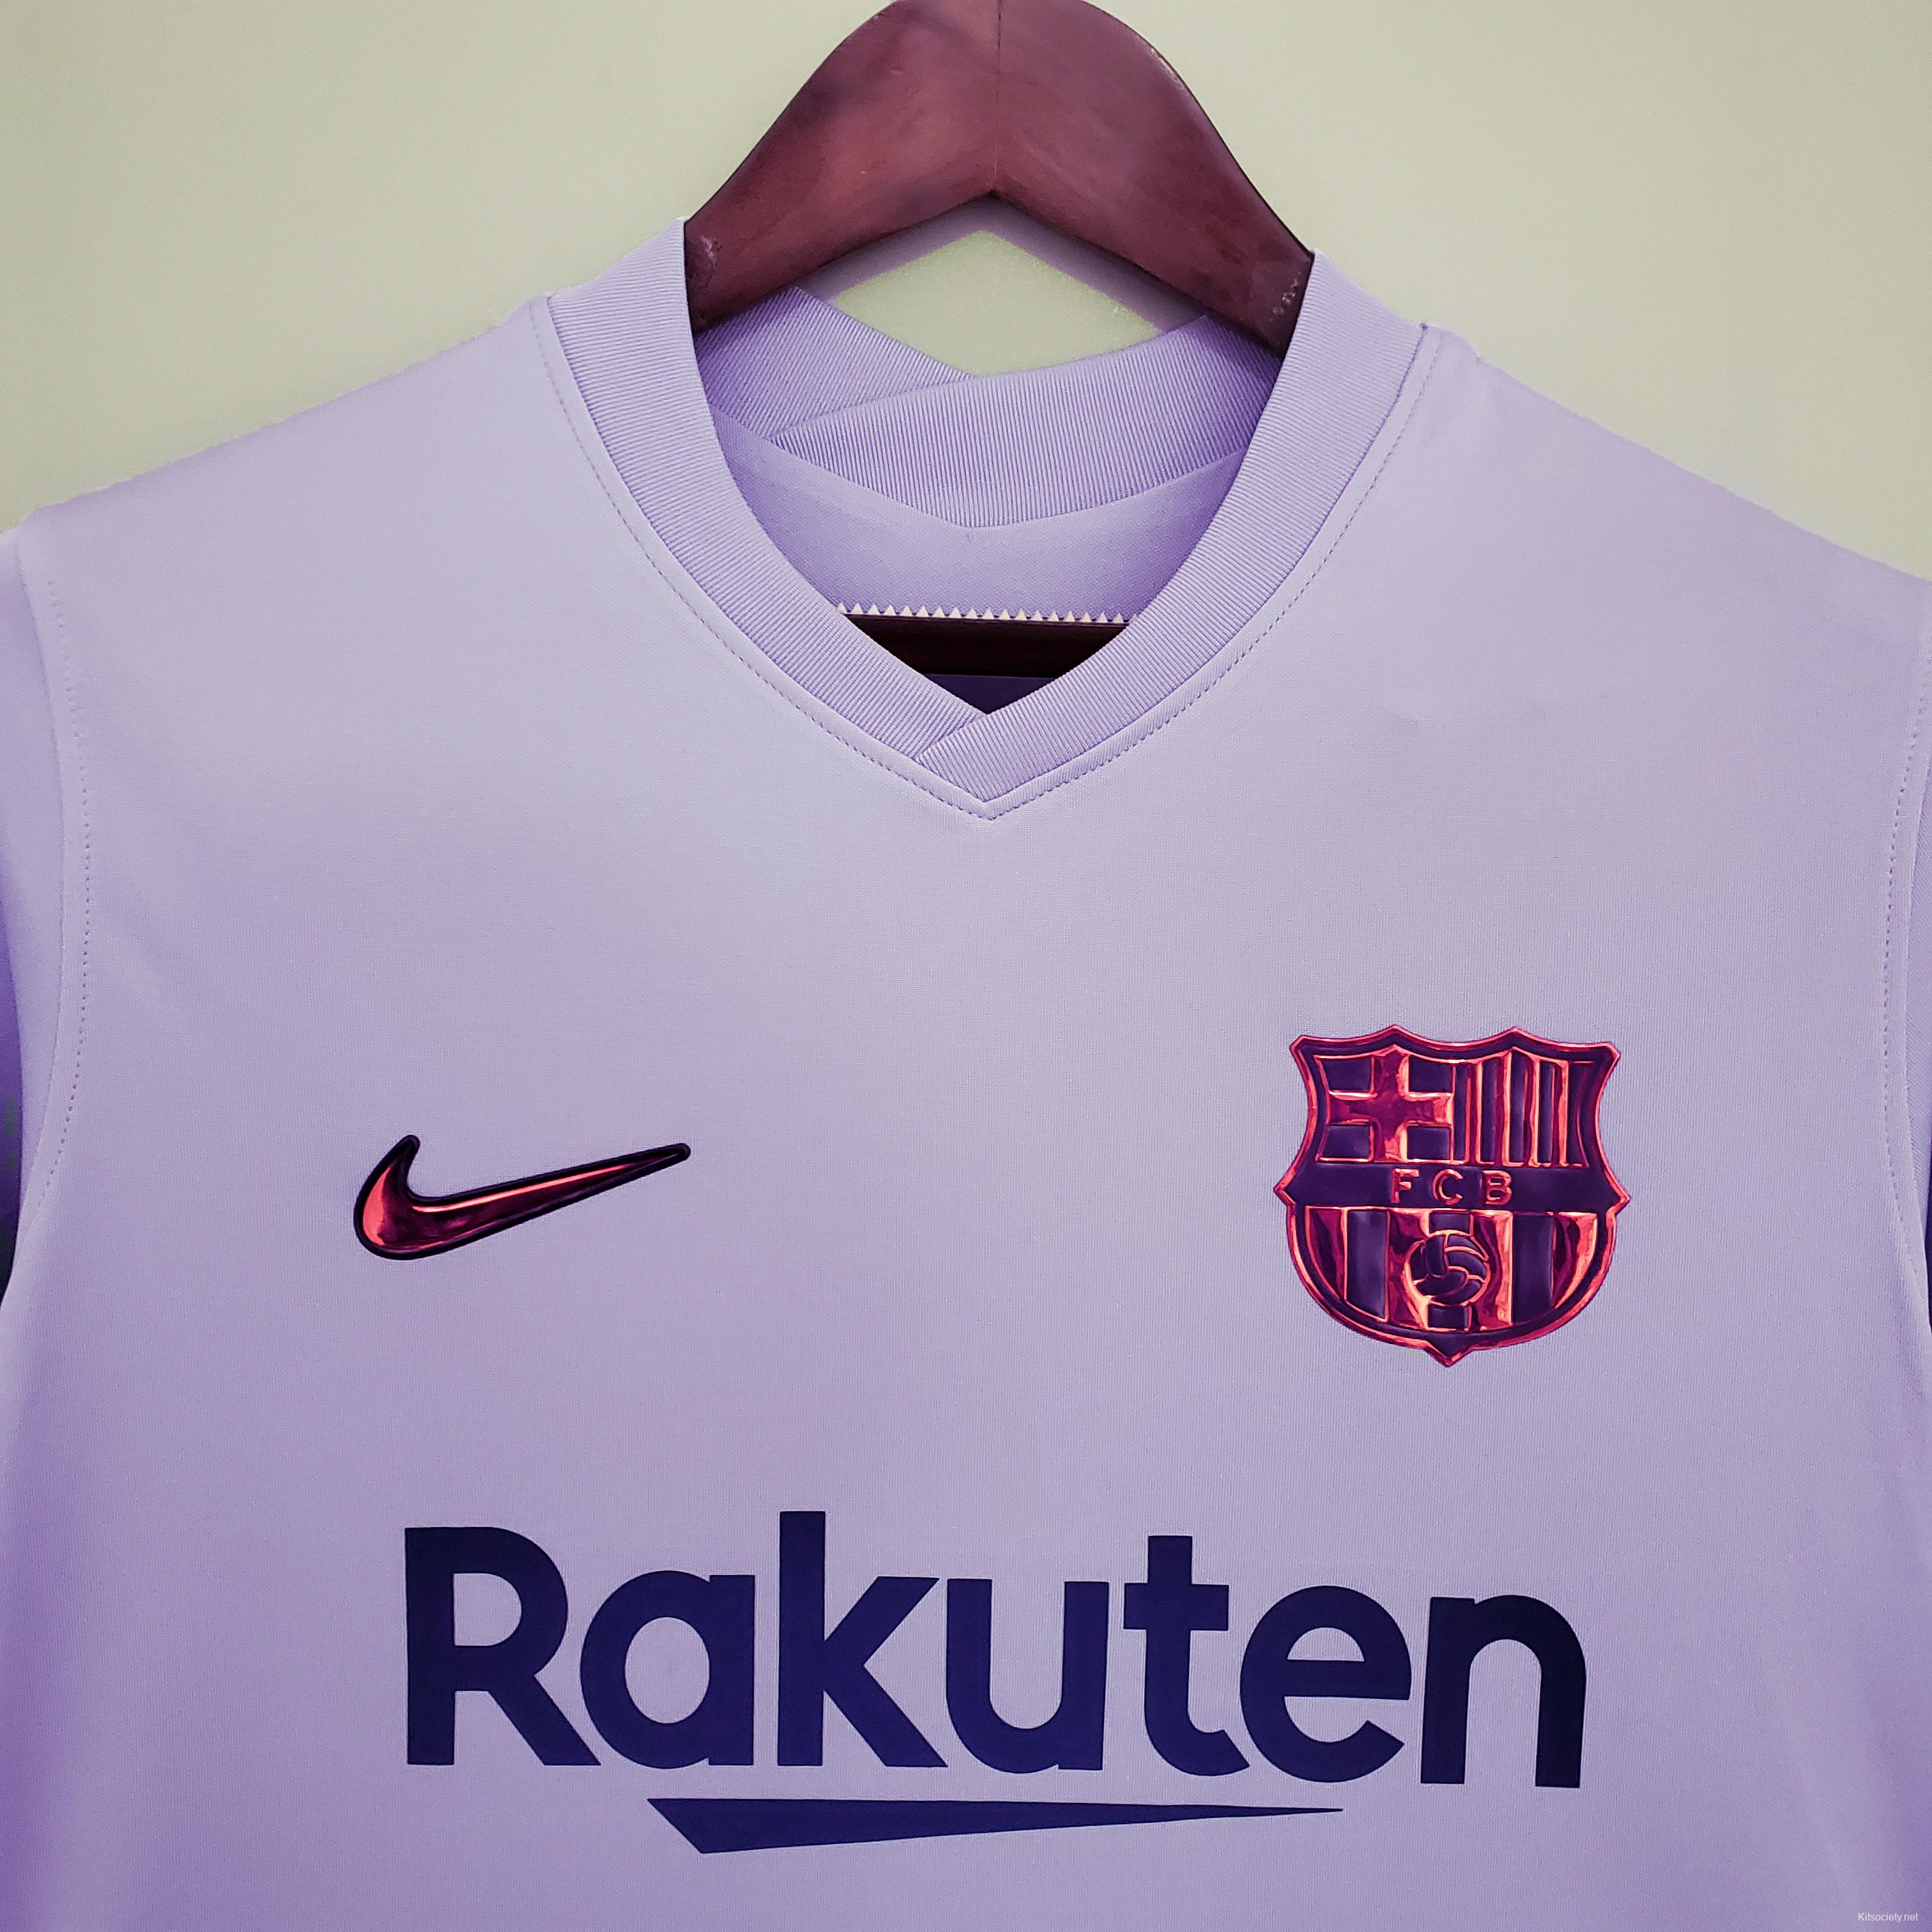 The new Barcelona away jersey 2021/2022